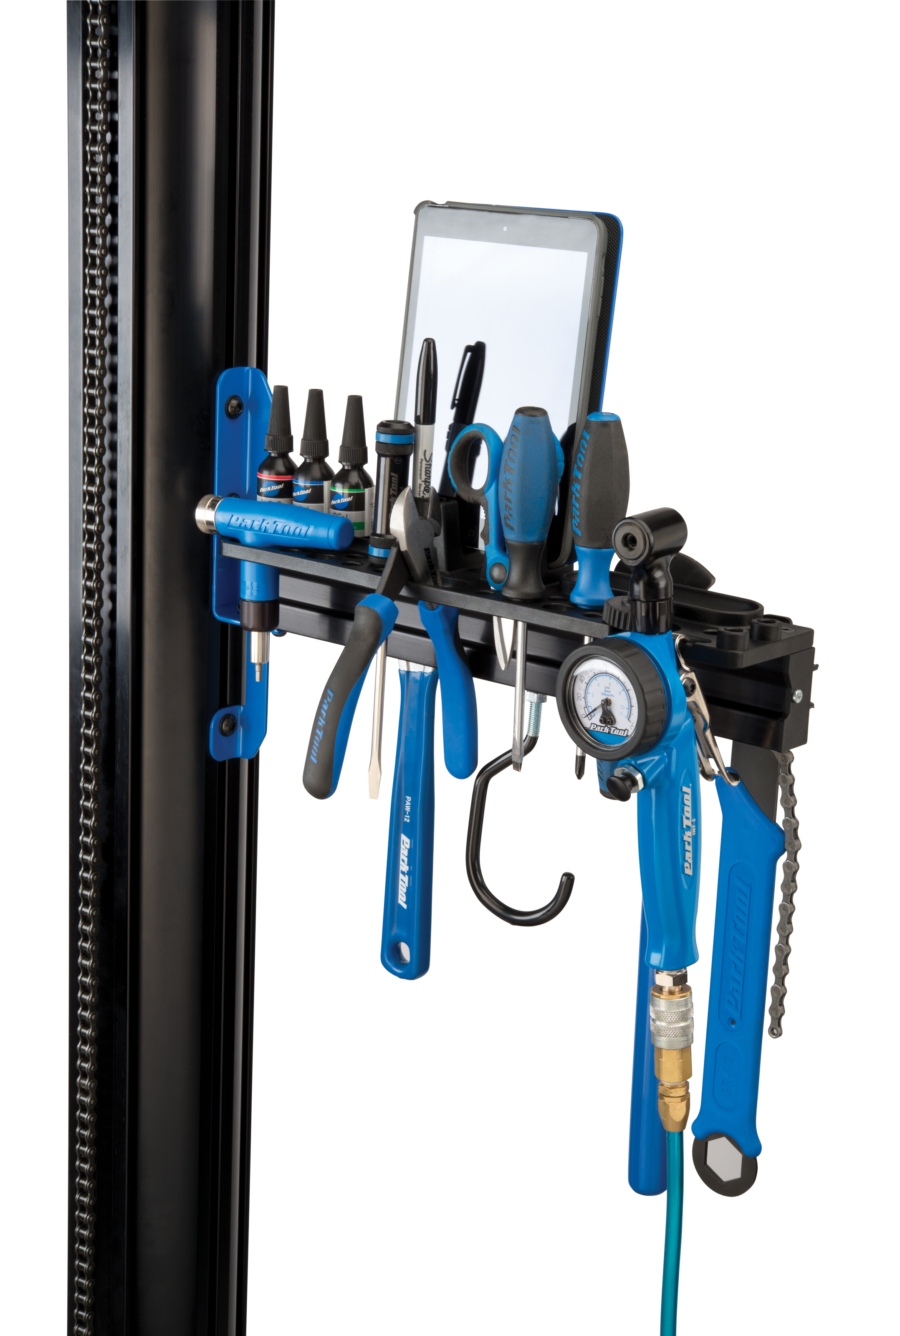 The Park Tool PRS-33TT Deluxe Tool and Work Tray full of tools and an iPad® attached to repair stand, enlarged